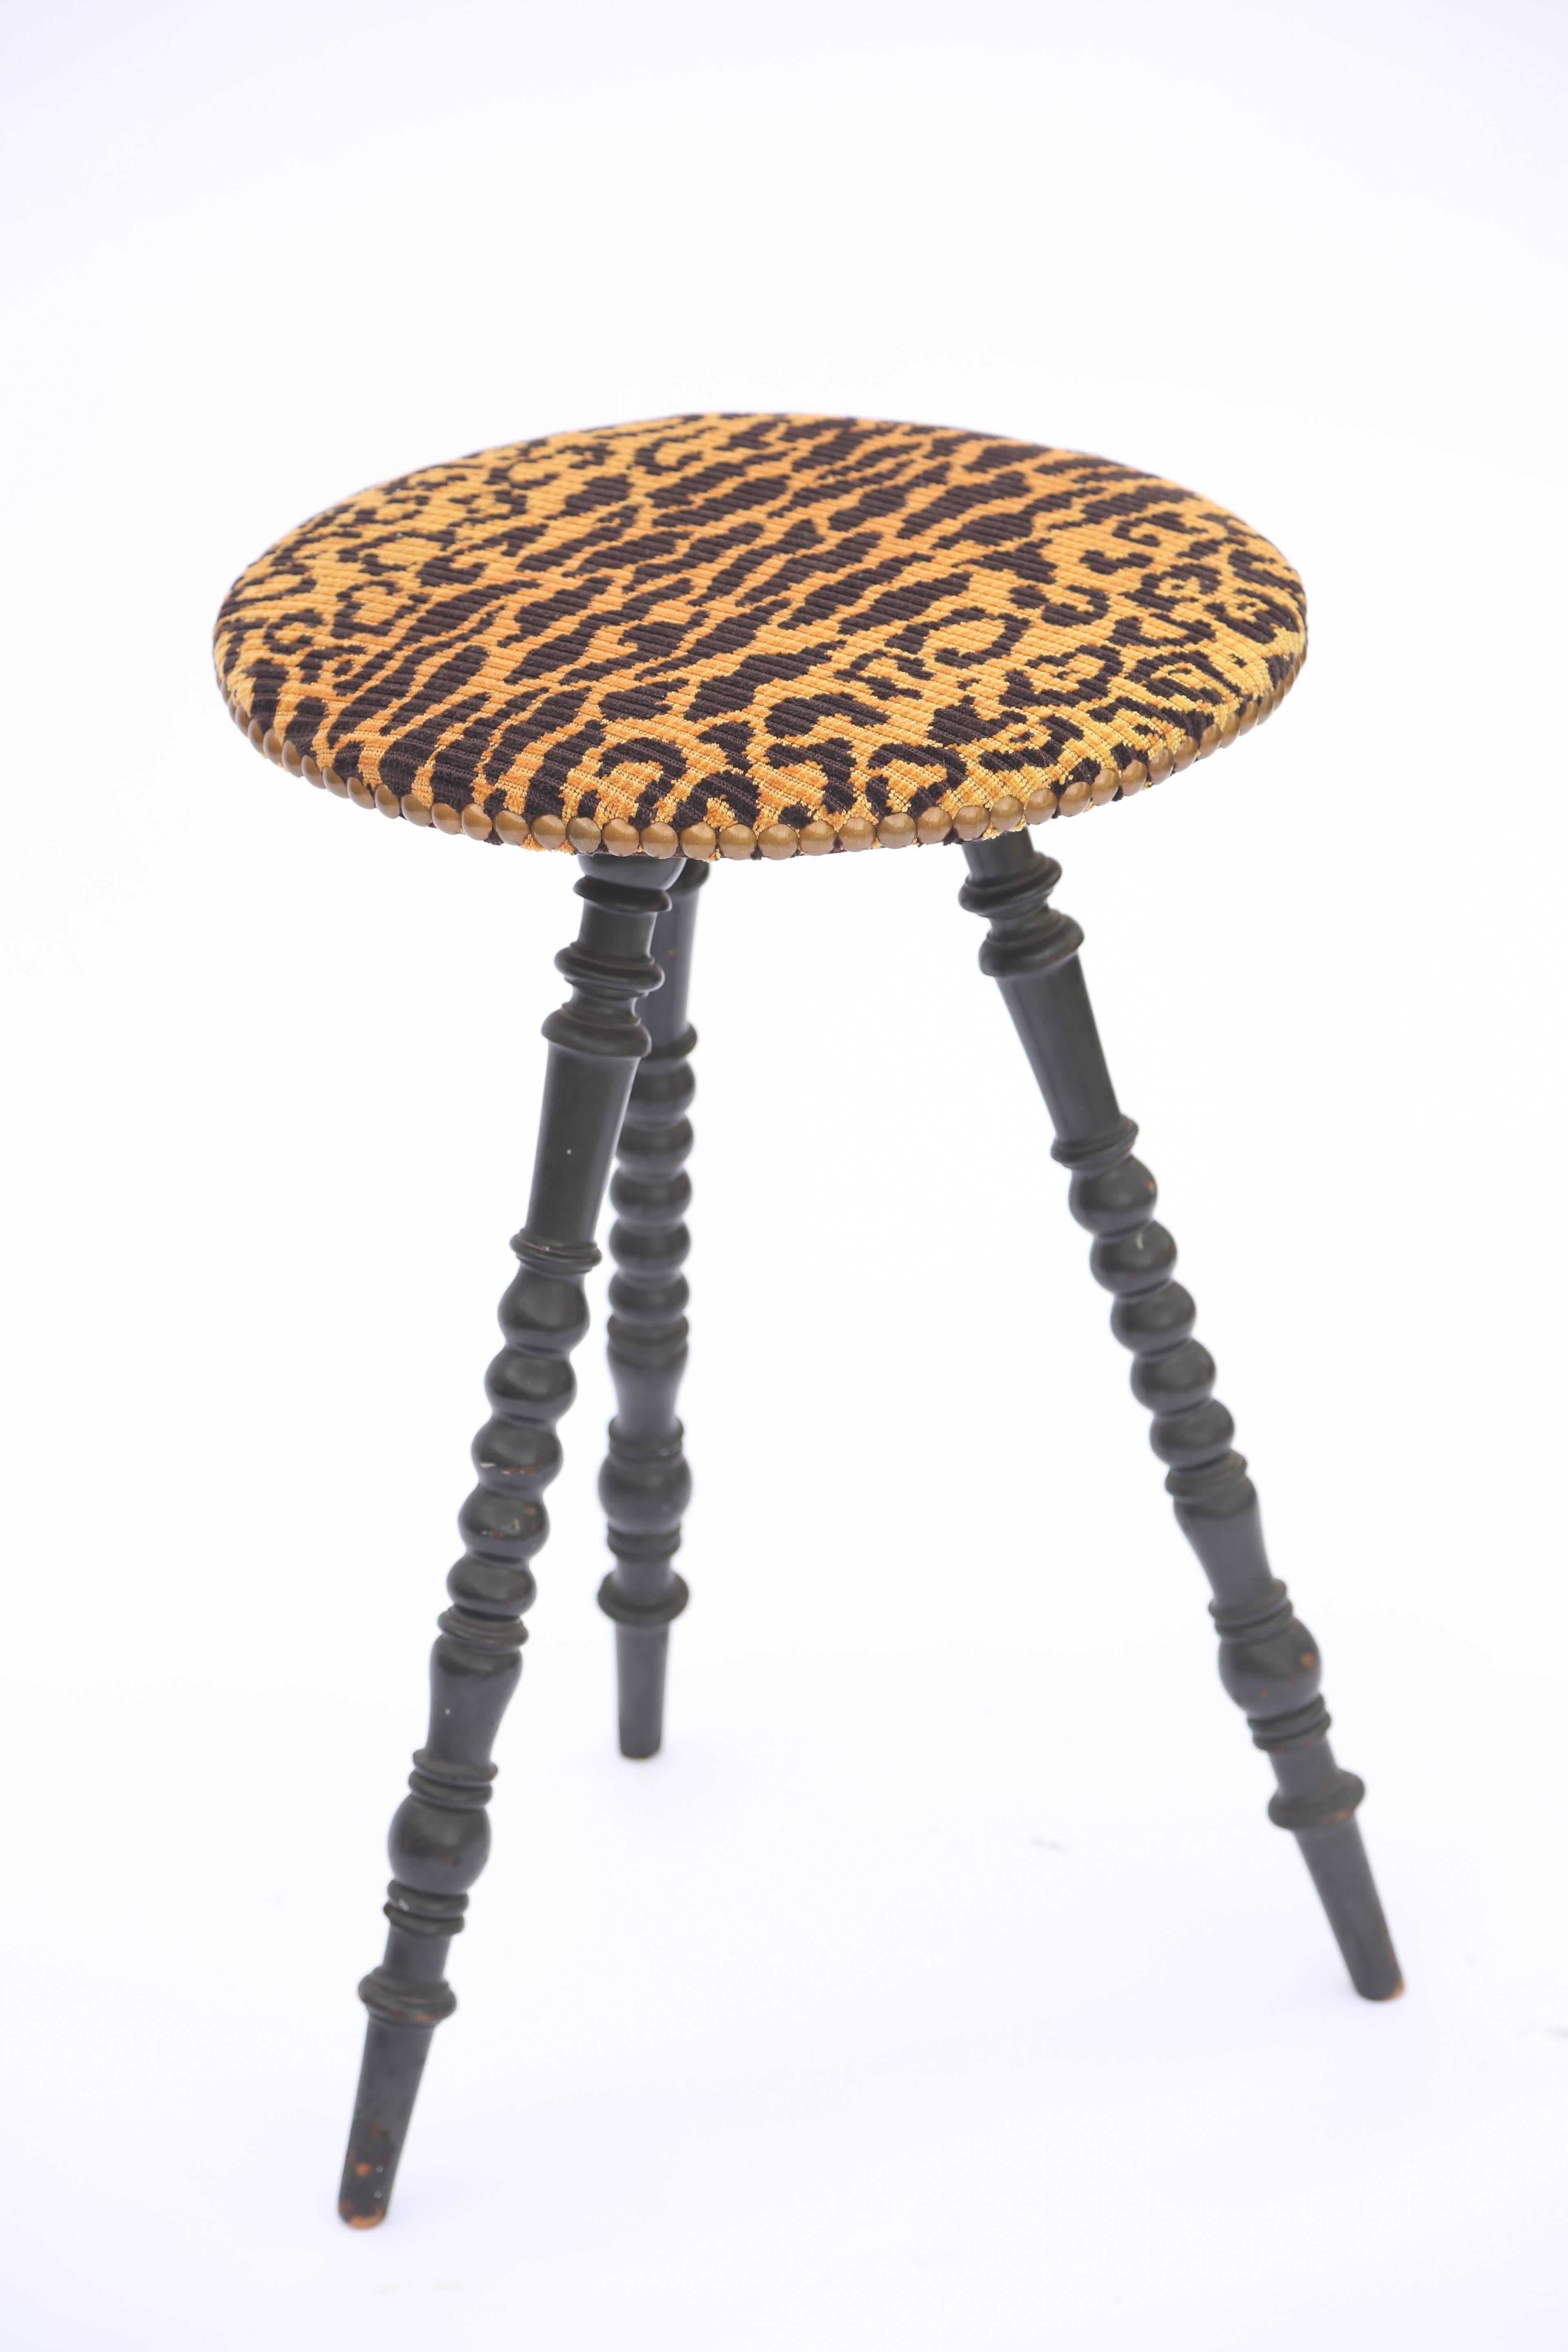 Occasional table having a round top upholstered in leopard fabric with nailheads, raised on a trio of turned legs in ebonized wood, ending in touipe feet. 

Stock ID: D4646.